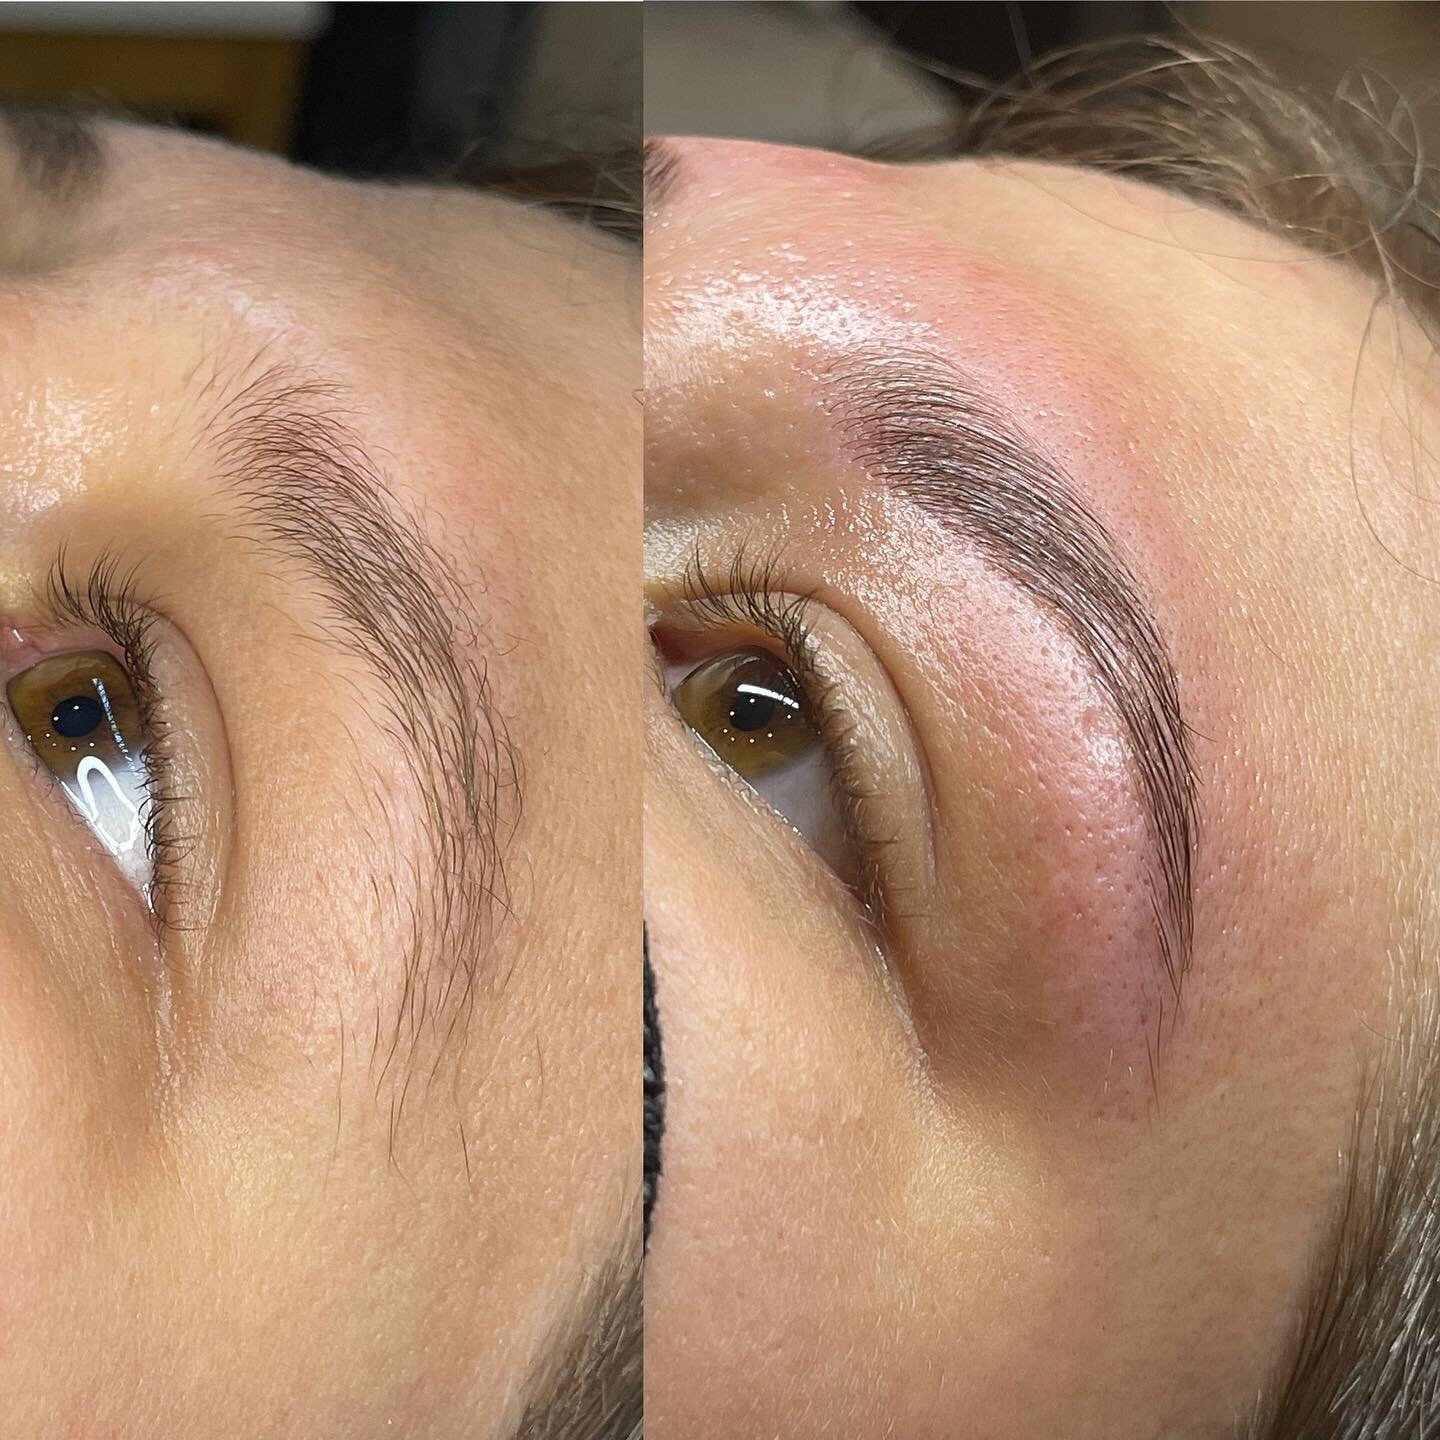 ✨Full Brow Makeover✨

@mosaicsalongroup 
#browlamination #brows #browshaping #browtinting #seattlebrows #seattle #seattlebeauty #seattlebrowlamination #beforeandafter #browtransformation #browbeauty #browbeforeandafter #browwax #smallbusiness #smallb